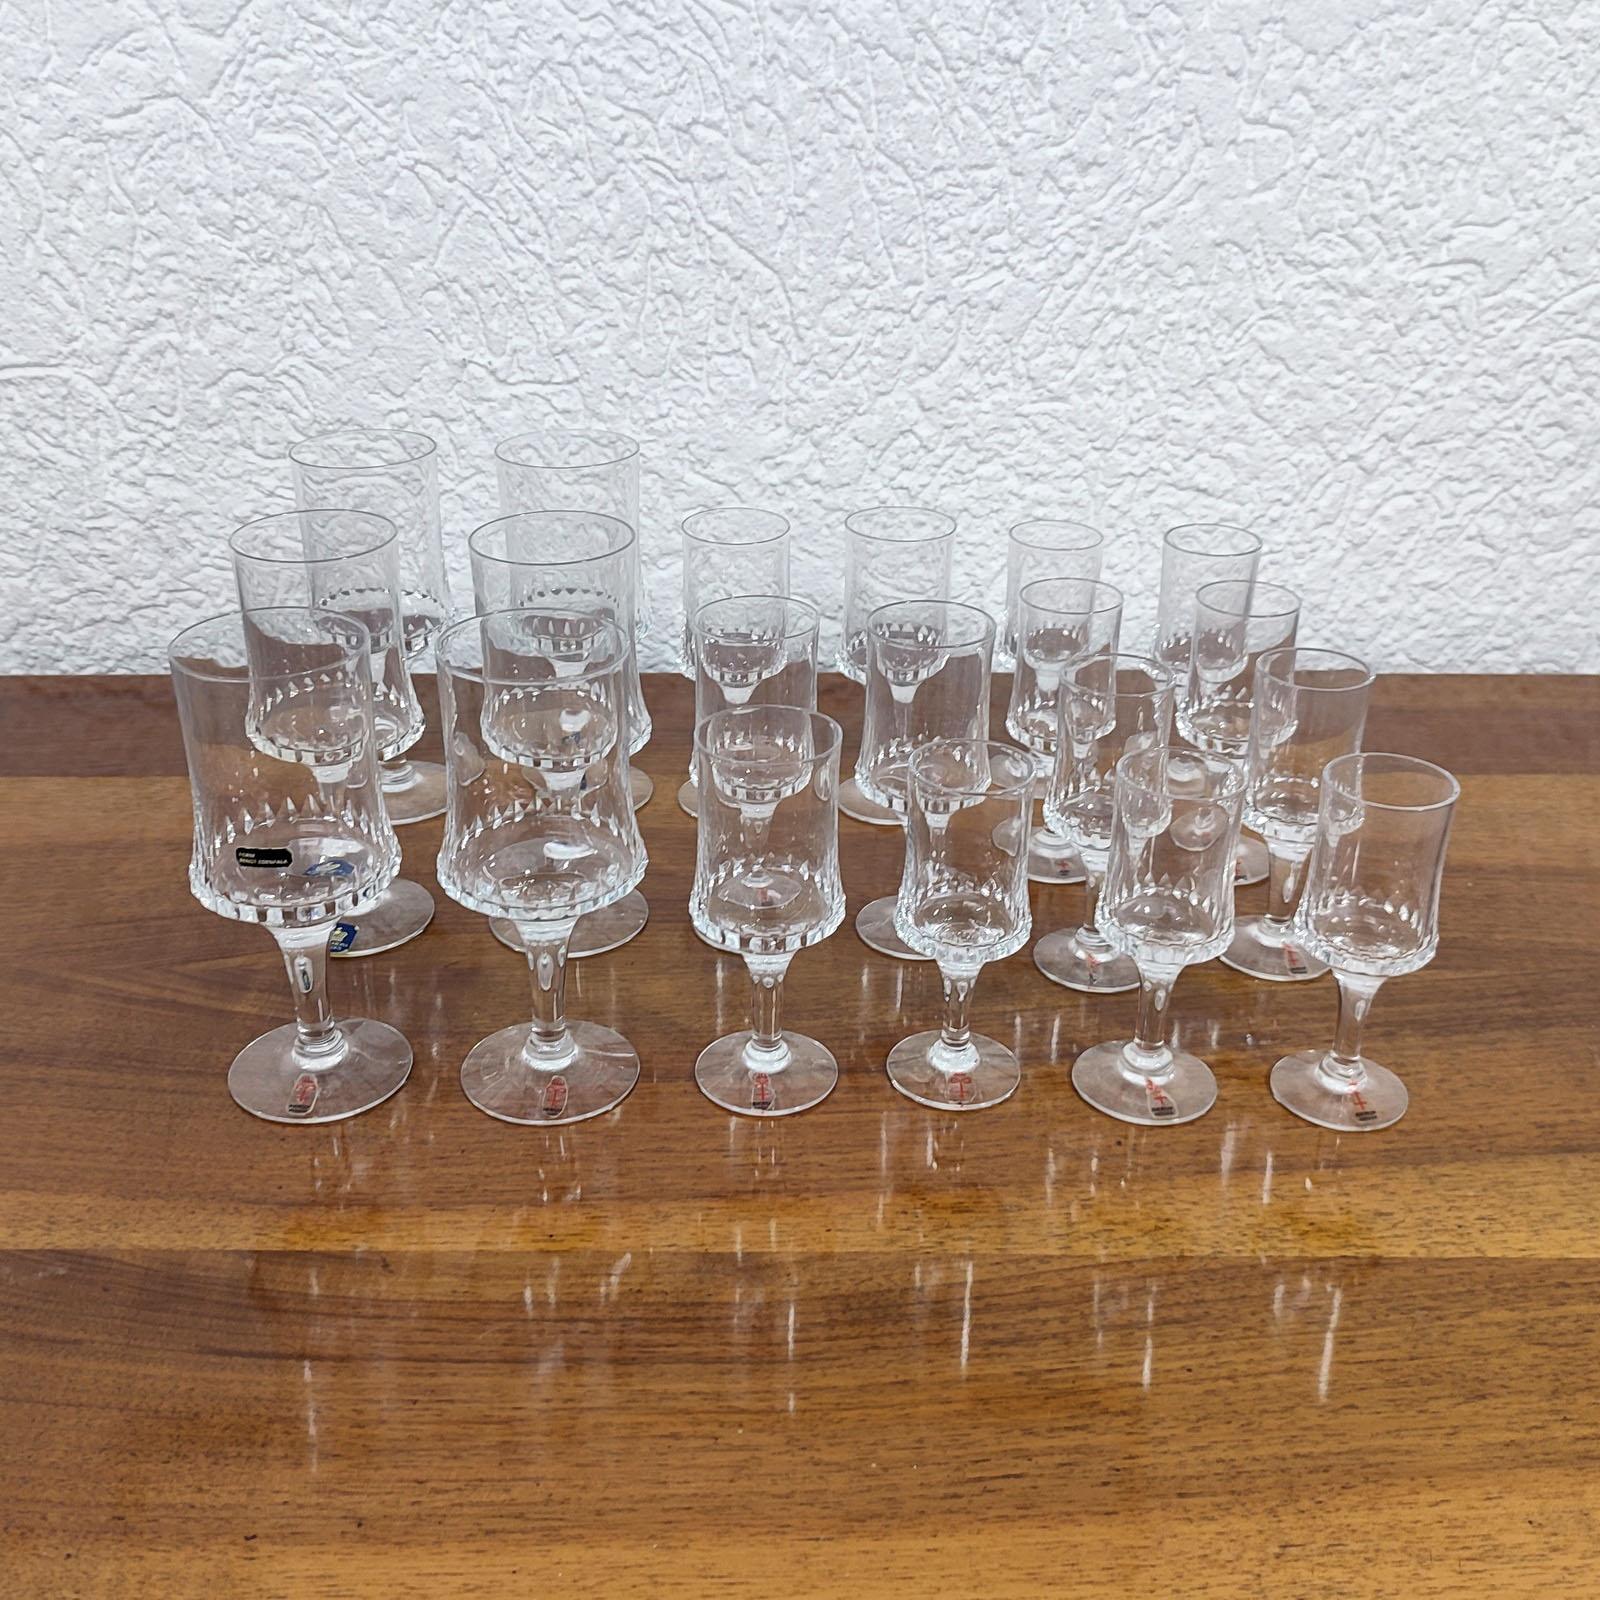 Bengt Edenfalk for Skruf and Royal Krona, 20 pcs parti of wine, Porto and Liquor glasses.
Stem glasses, around decorated in diamond cut crystal motif, these glasses are quite rare an extremely rare find.
Most of them still keeping the original